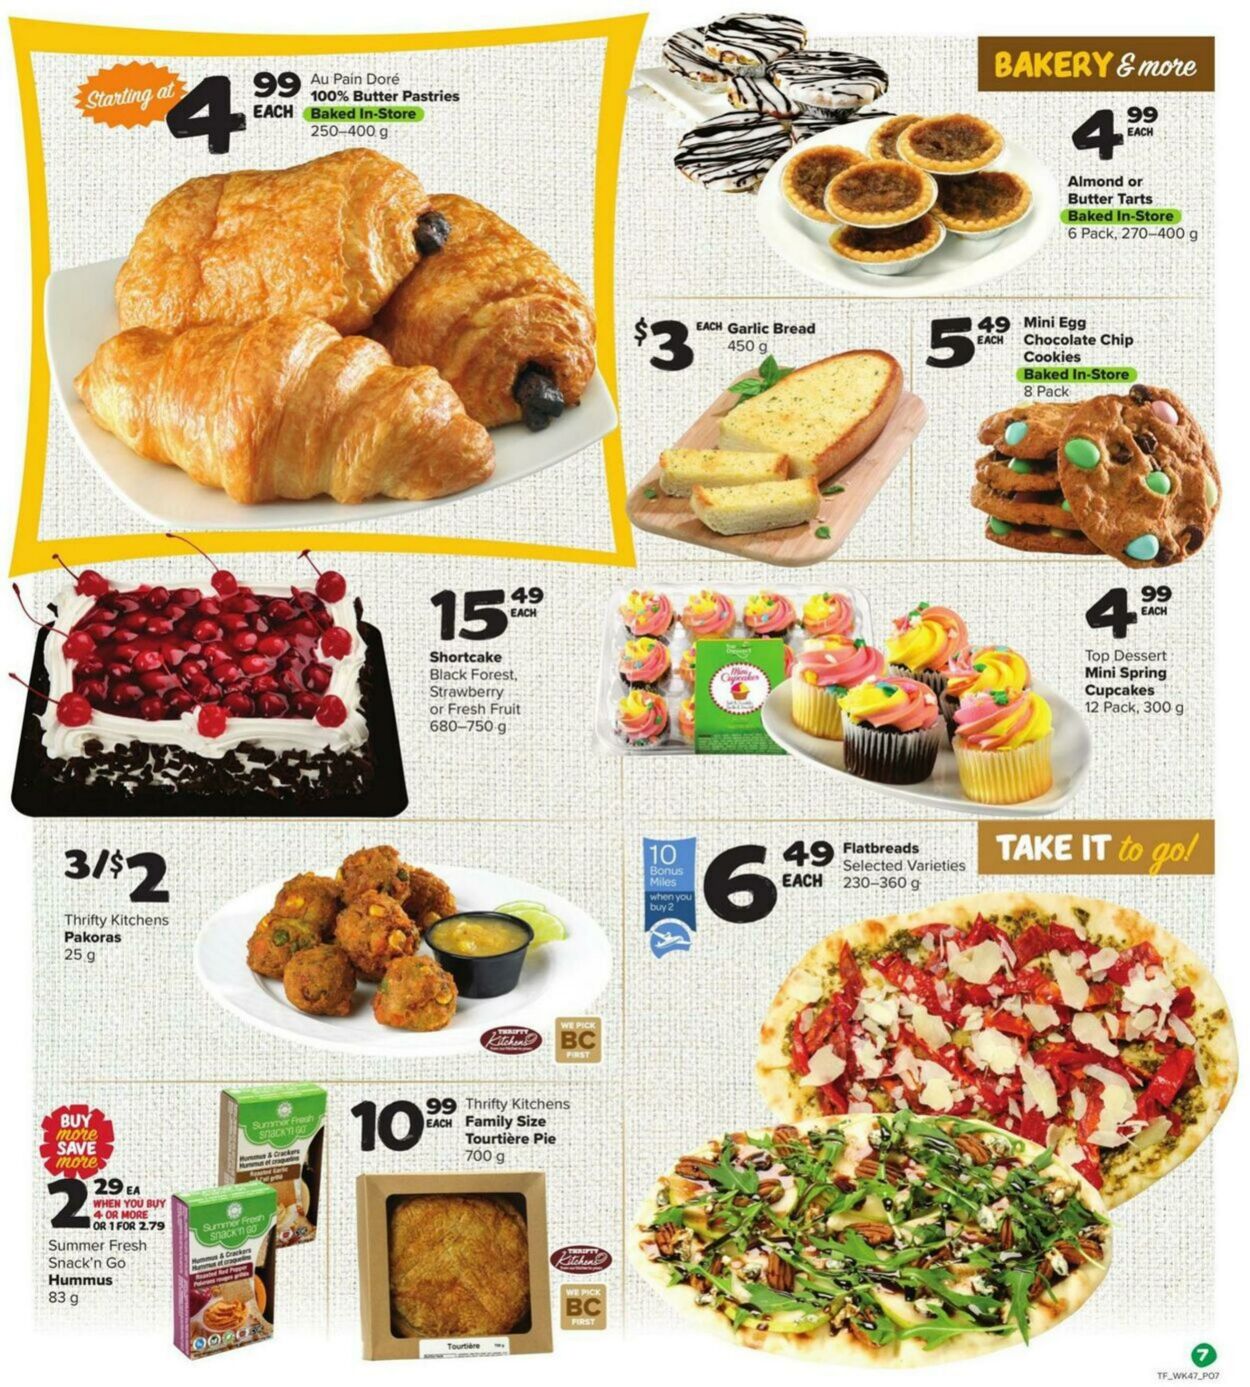 Flyer Thrifty Foods 17.03.2022 - 23.03.2022